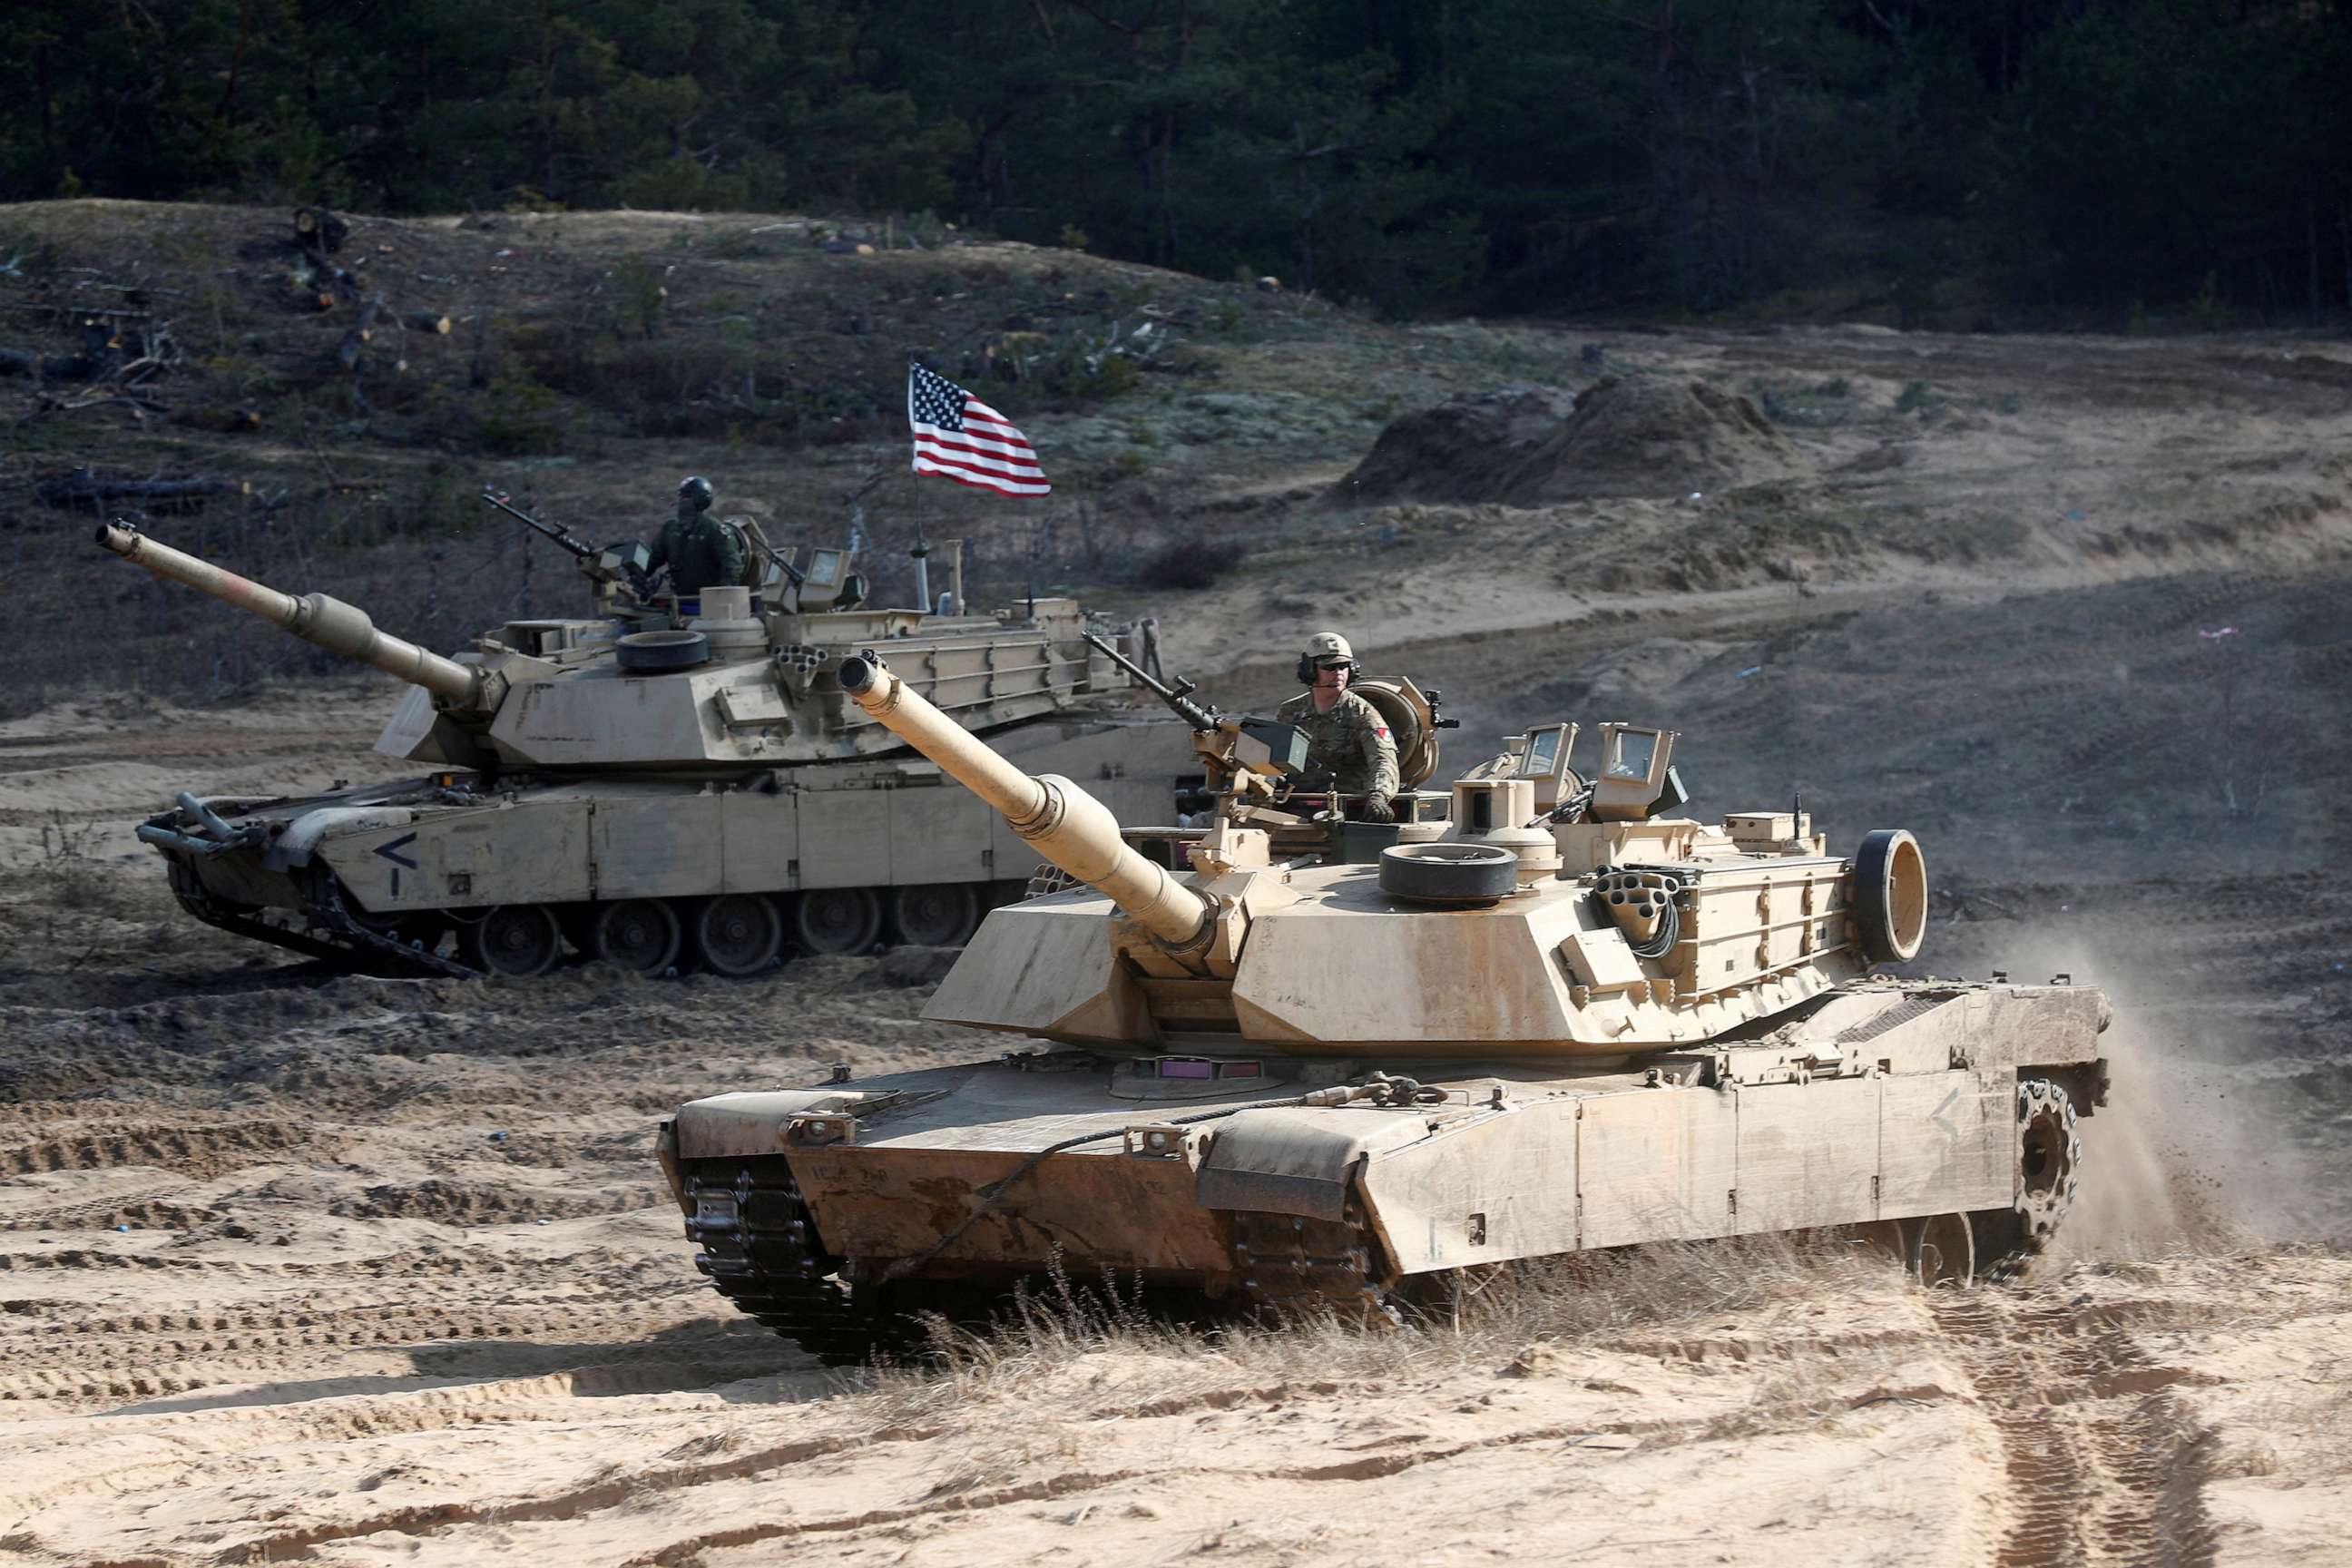 PHOTO: U.S. Army M1A1 Abrams tanks at a military exercise in Adazi, Latvia, March 26, 2021.